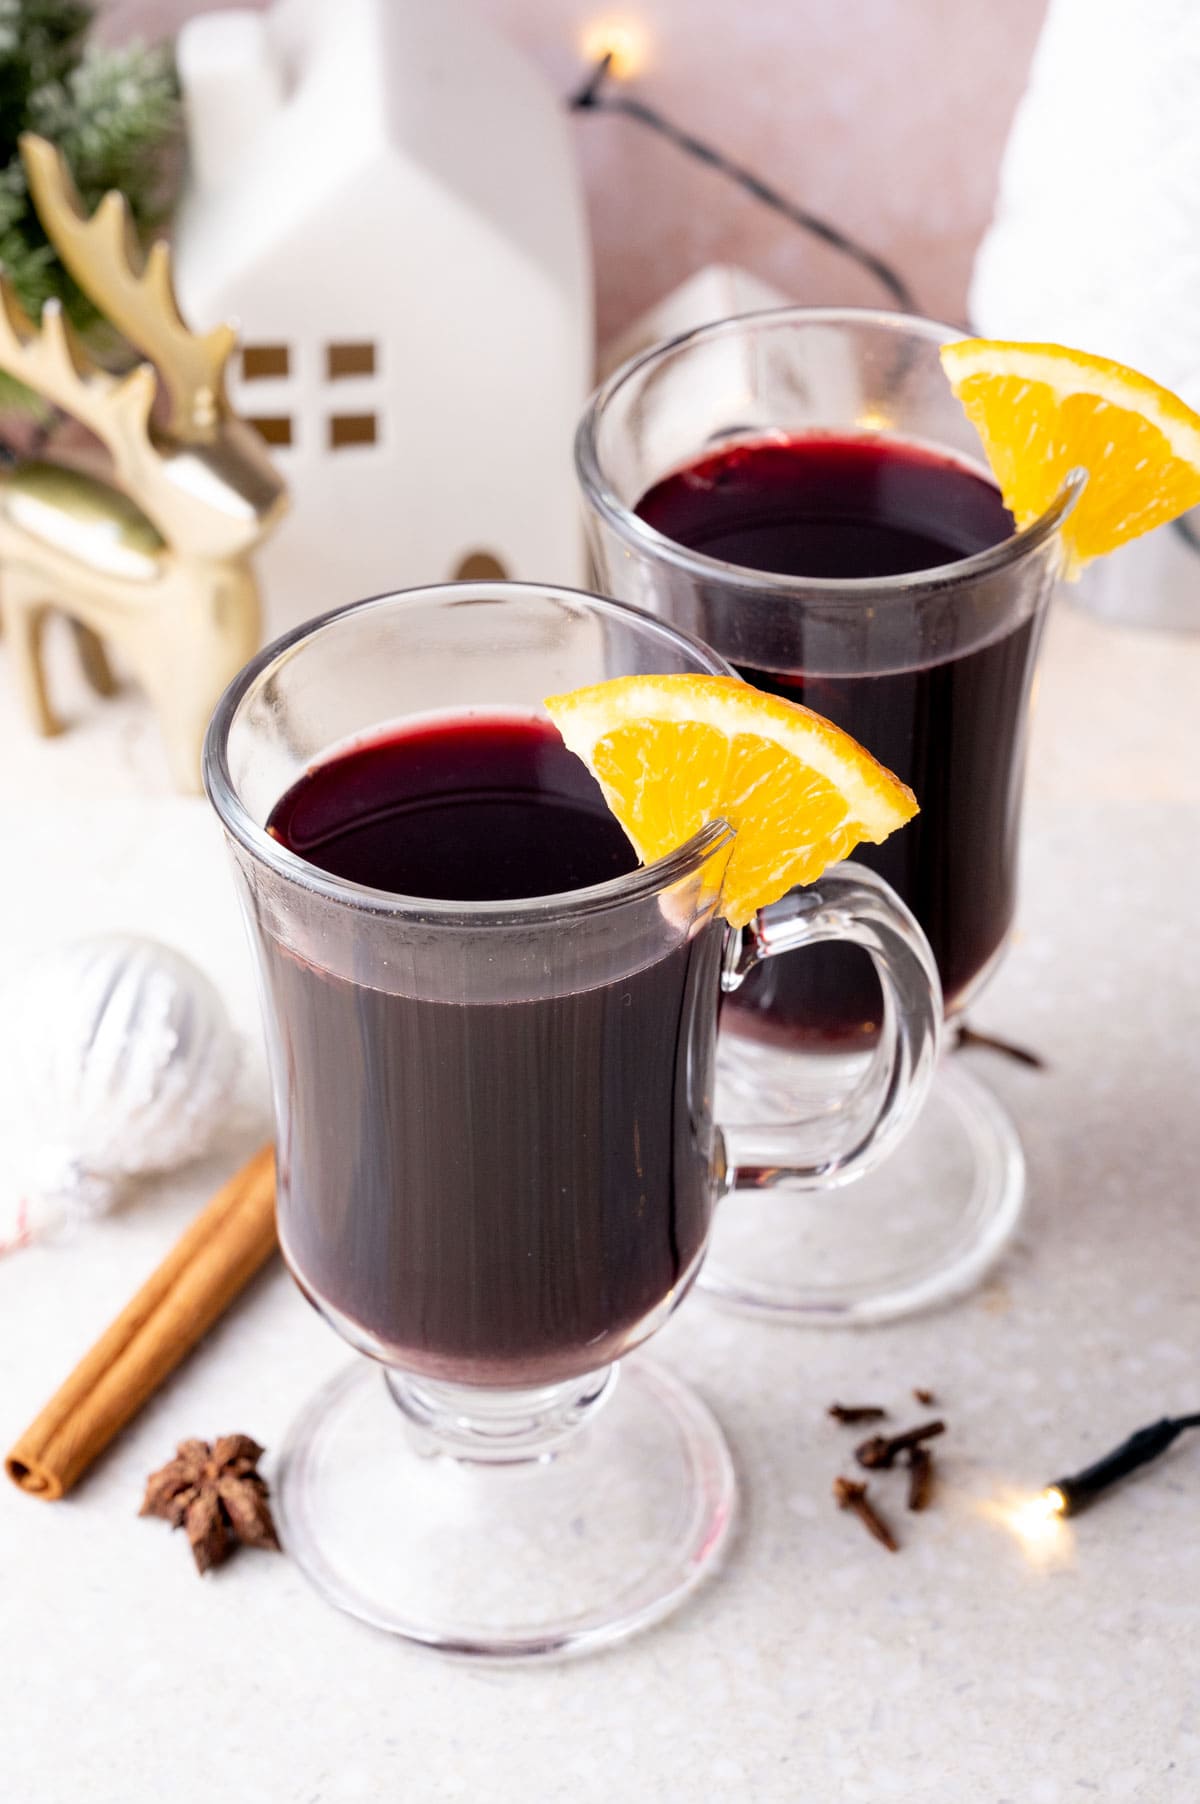 Two glasses with Glühwein on a grey stone board garnished with orange wedges. Christmas decorations in the background.